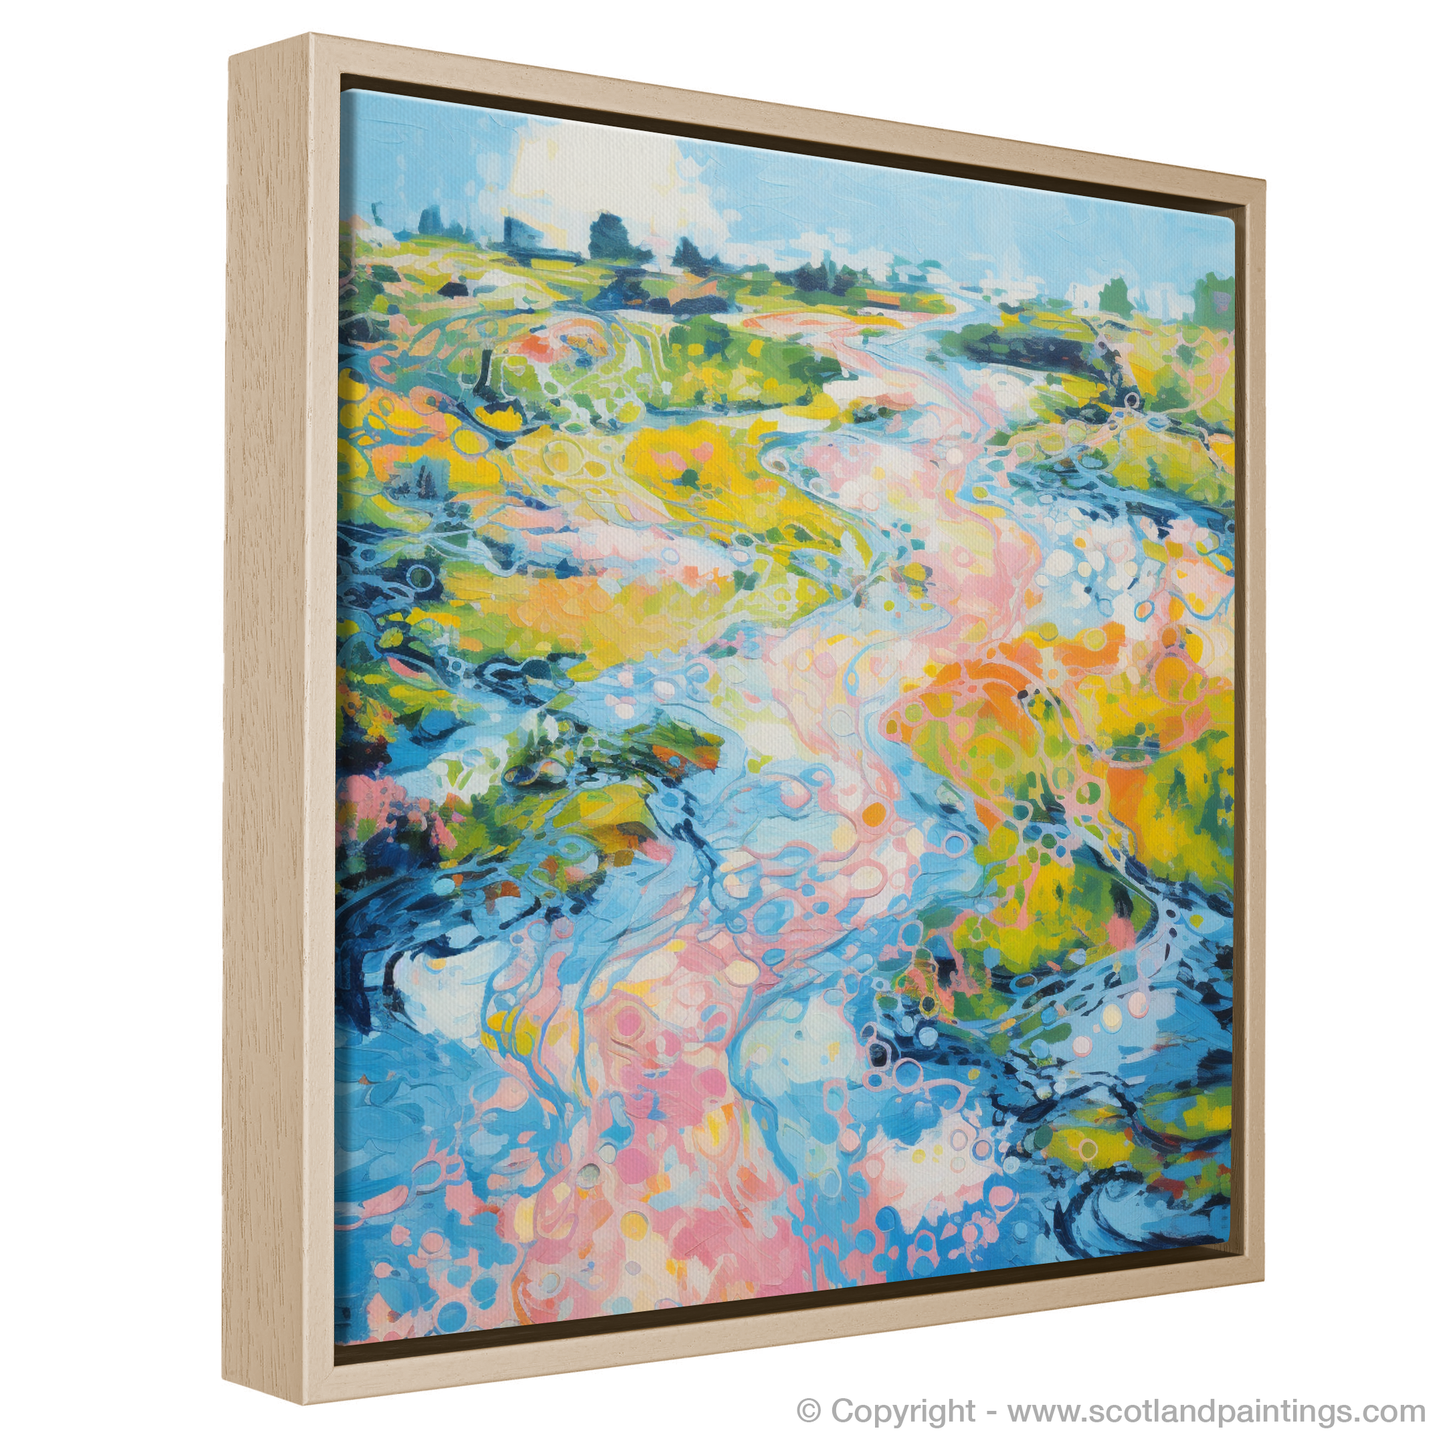 Painting and Art Print of River Dee, Aberdeenshire in summer entitled "Summer Symphony on the River Dee".